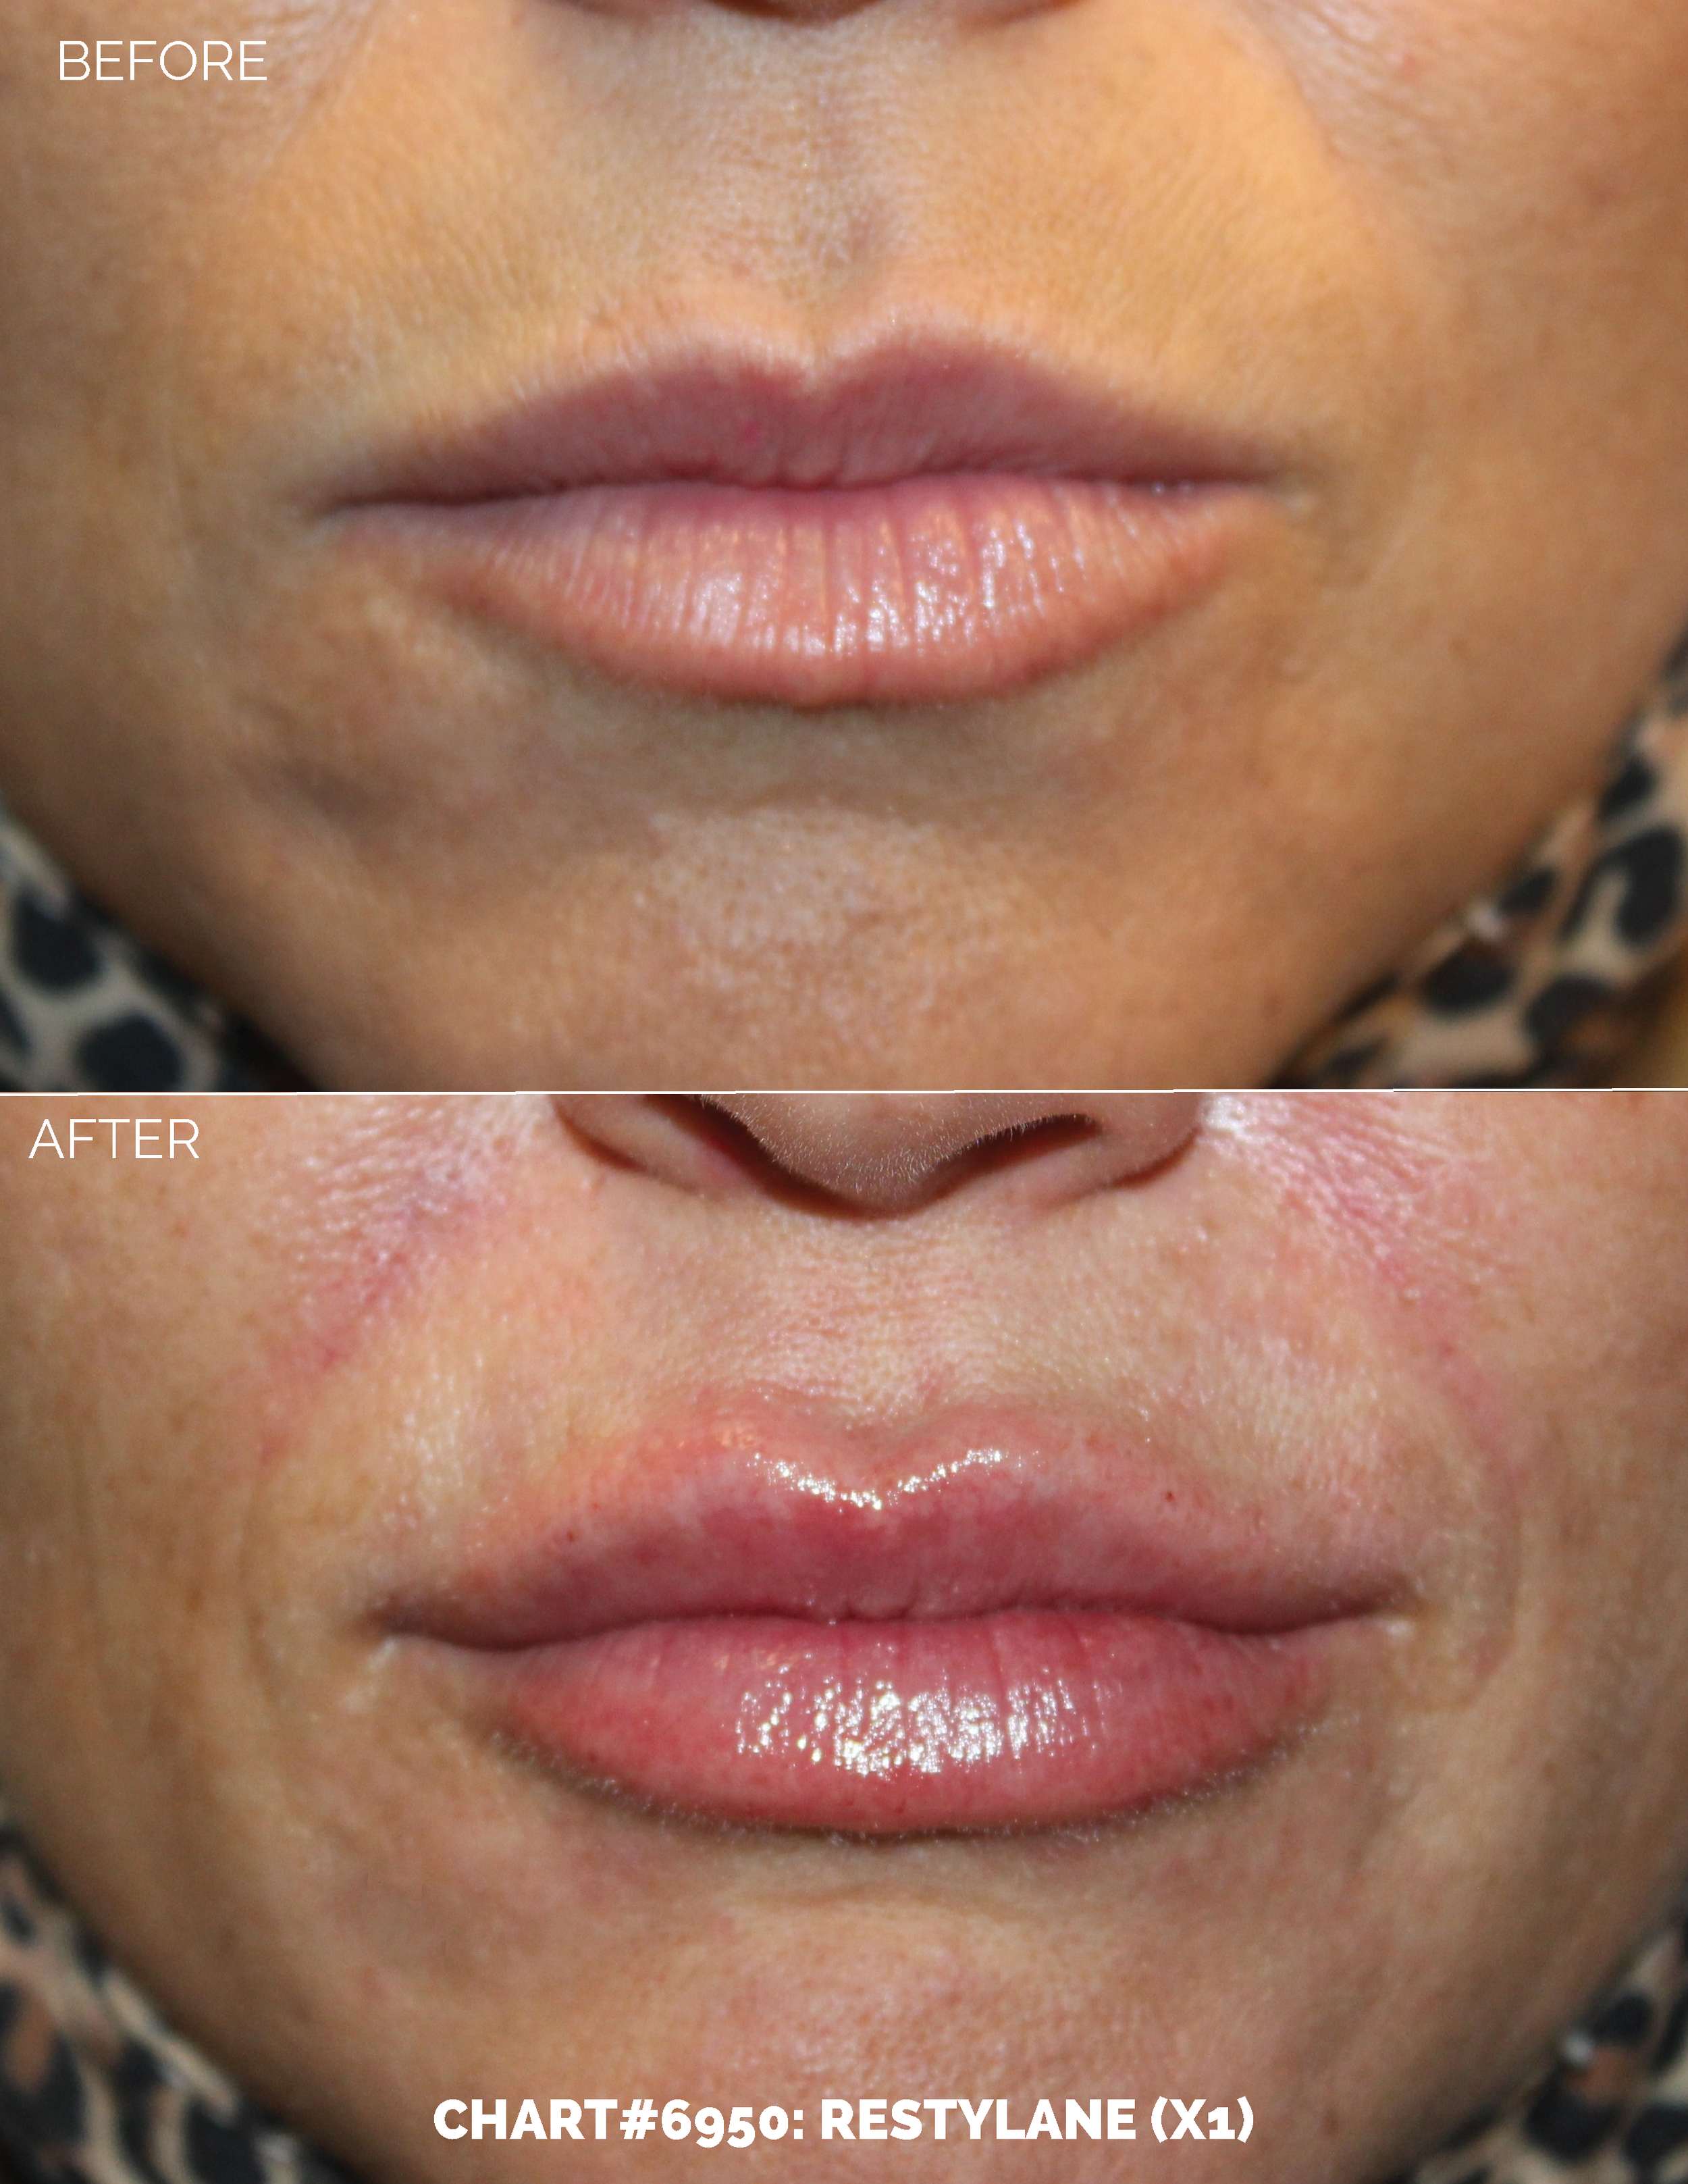 LIPS FILLER_CHART#6950- RESTYLANE (X1).png